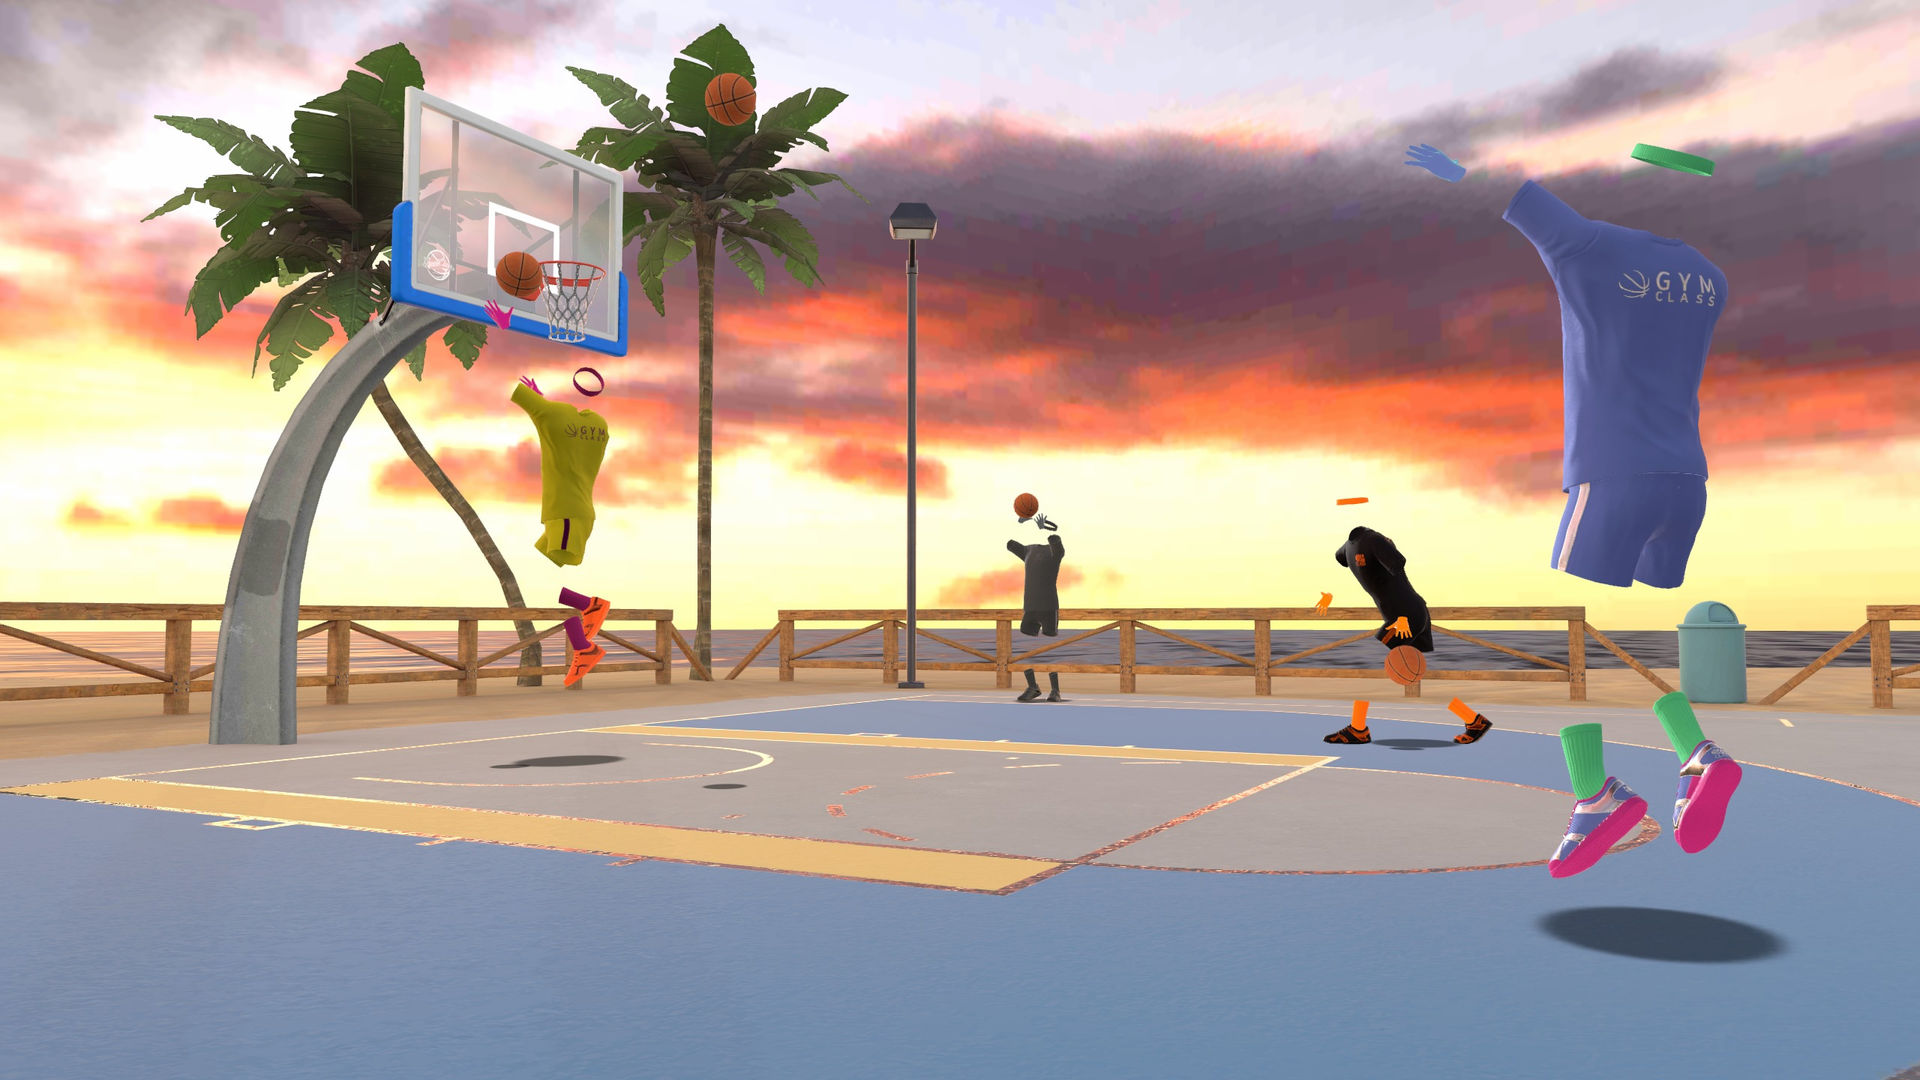 Play Basketball On NBA Courts In VR With Gym Class - VRScout